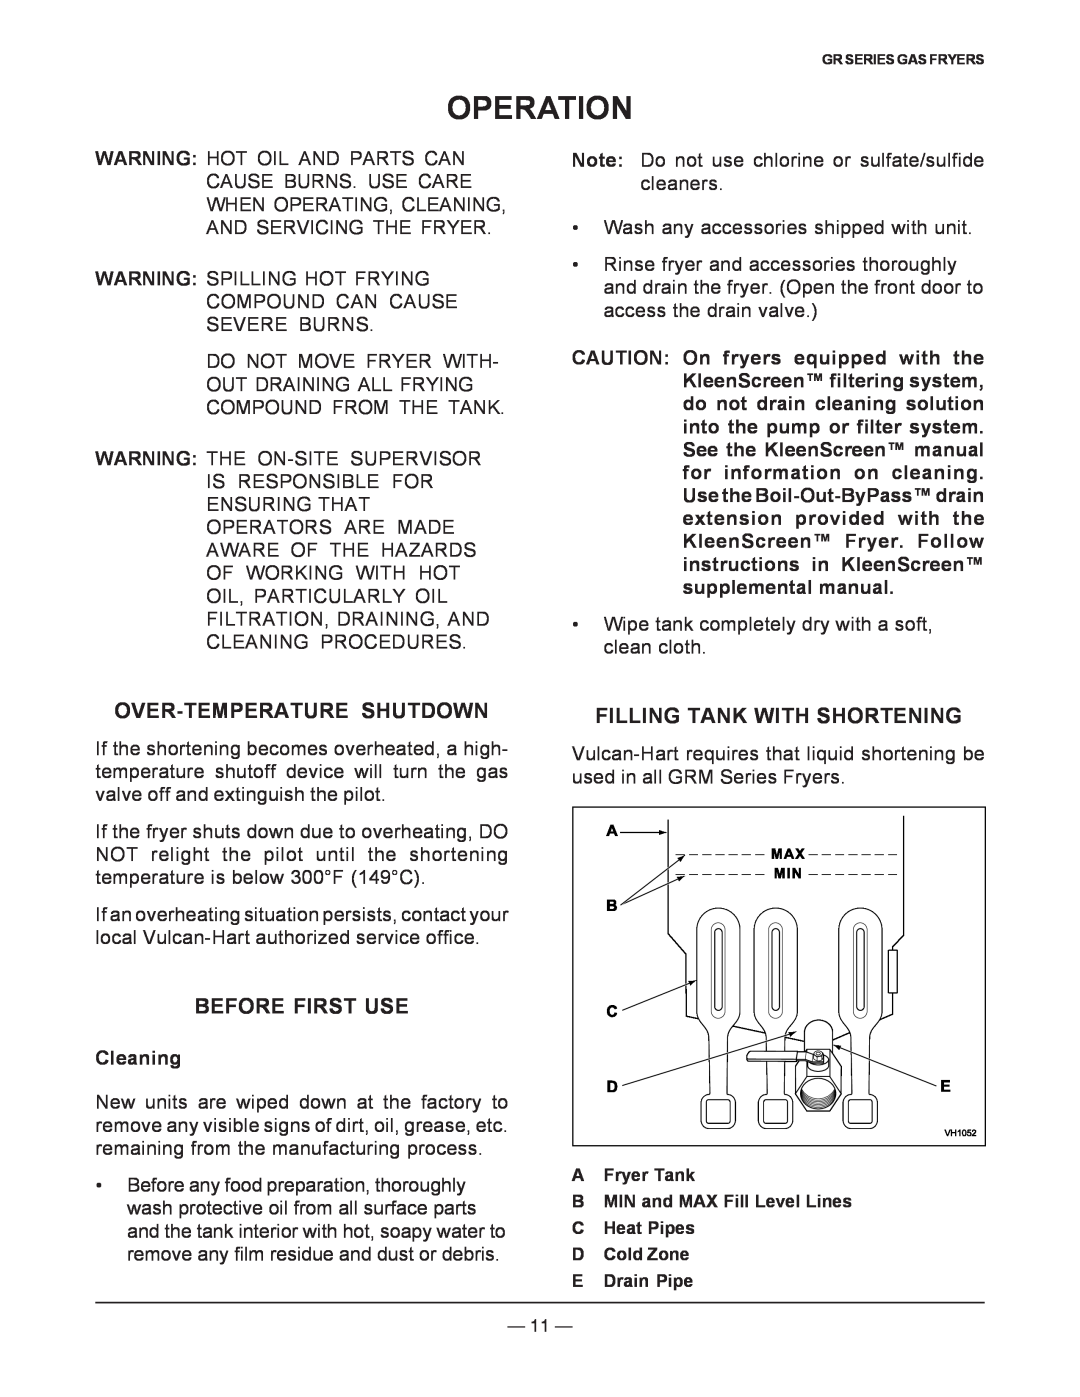 Vulcan-Hart operation manual Operation, Over-Temperatureshutdown, Before First Use, Filling Tank With Shortening, Cleaning 